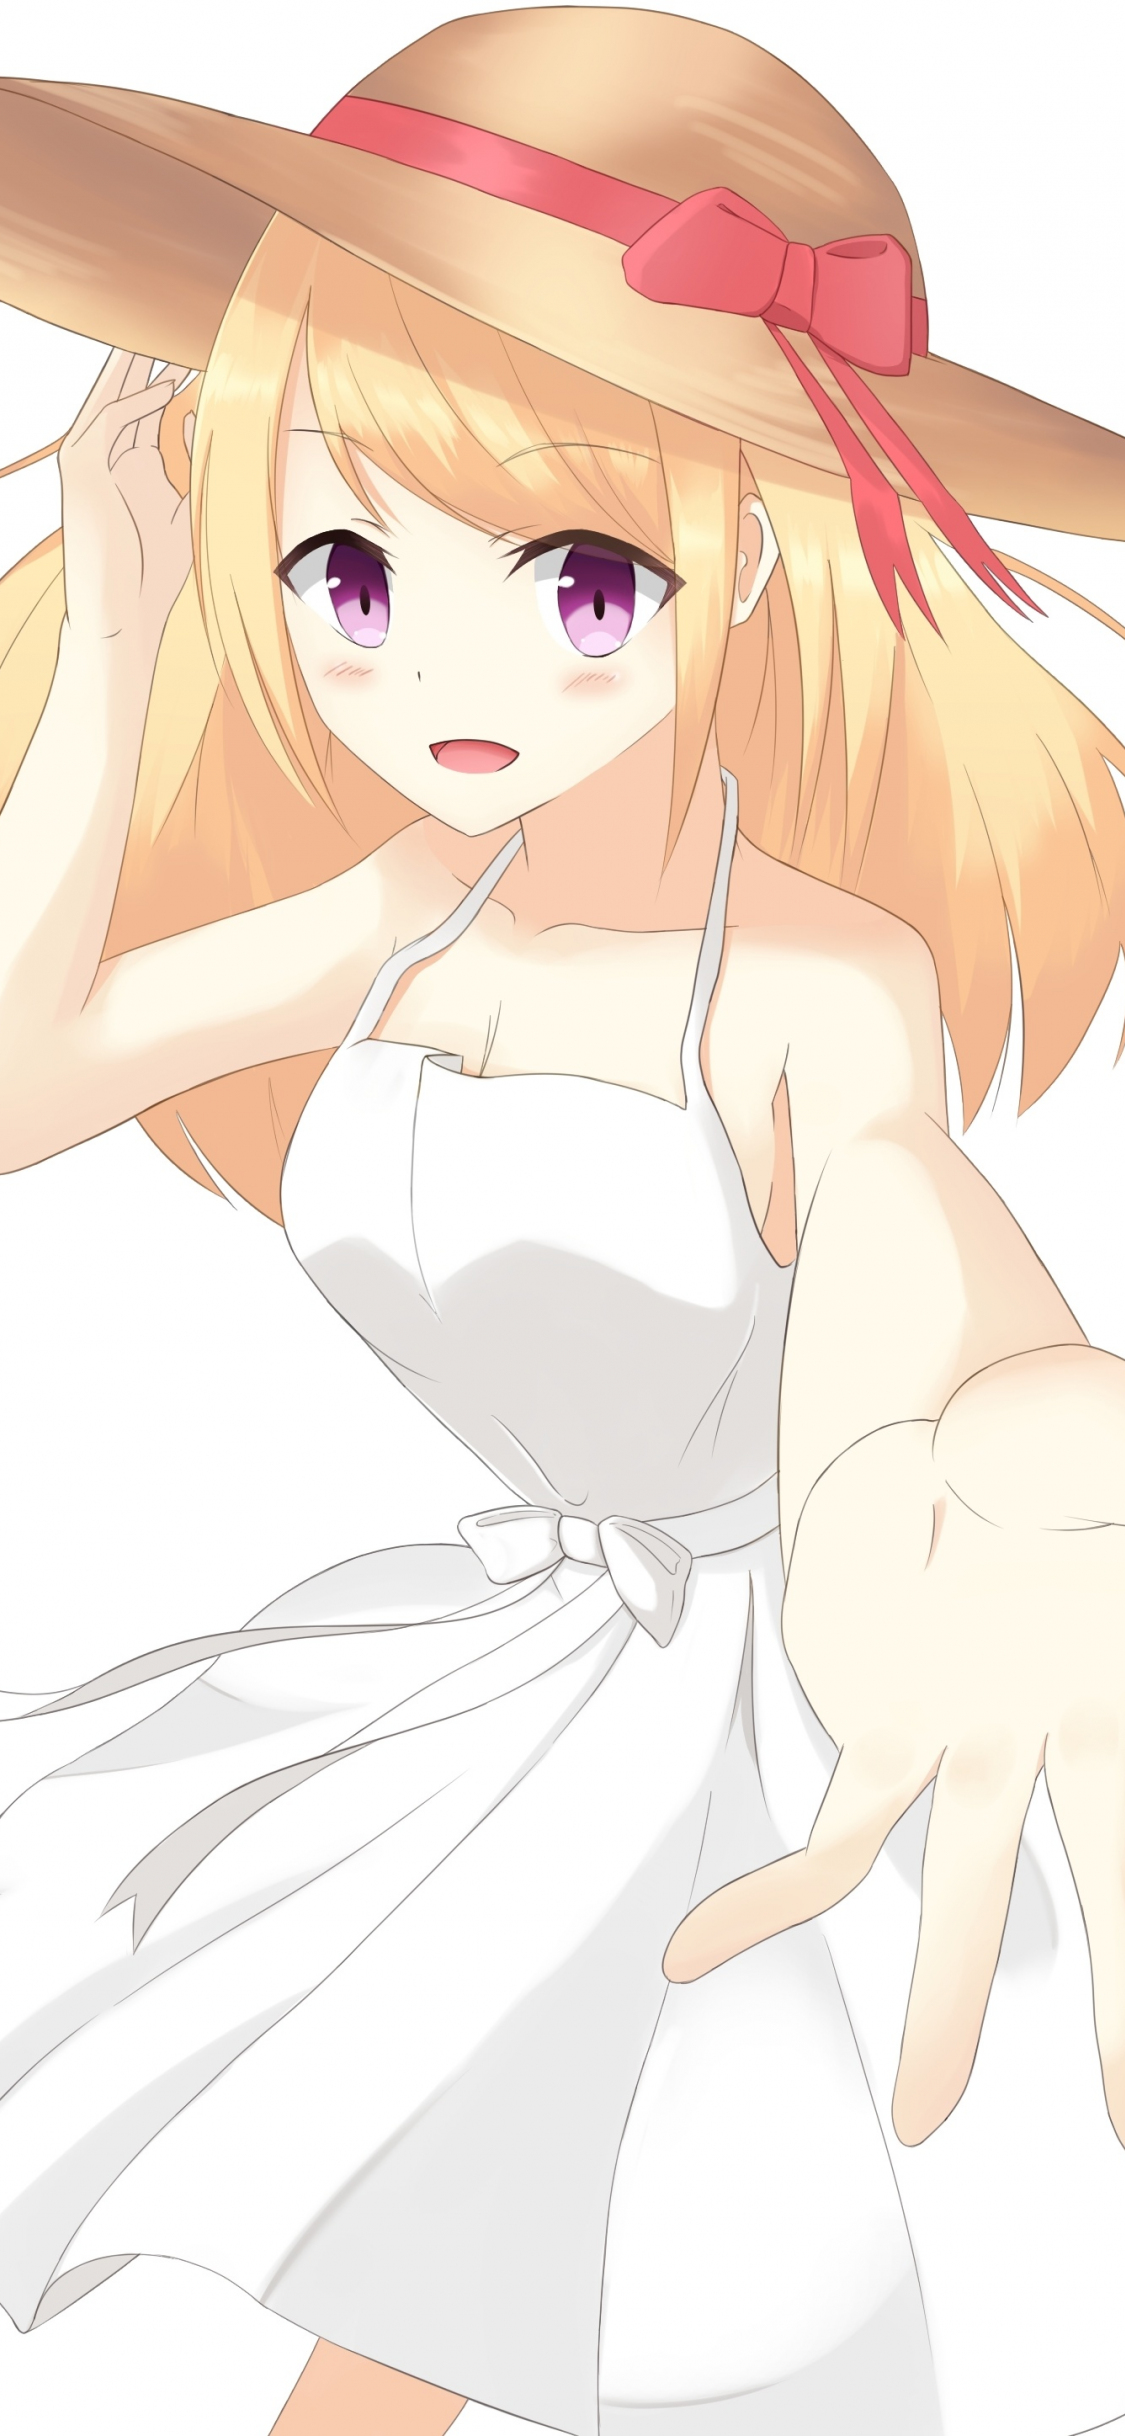 Download wallpaper 1125x2436 cute, anime girl, blonde, hat, summer, iphone  x, 1125x2436 hd background, 18546